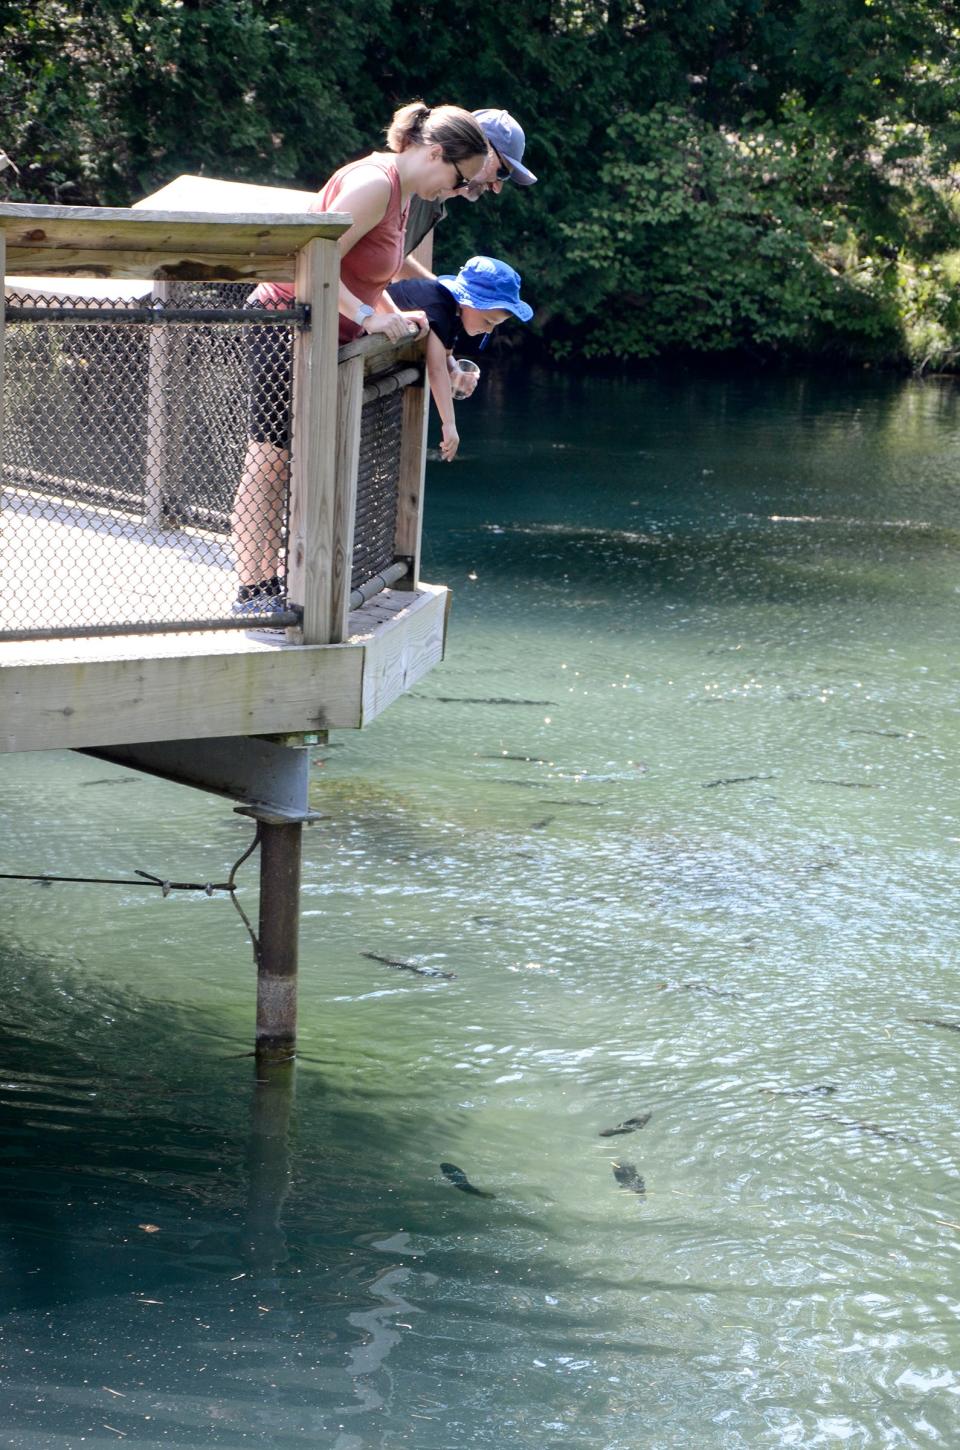 Sarah, Jacob and Jeff Powell, visiting from Pinckney, feed the fish in one of the ponds at the Oden State Fish Hatchery on Thursday, Aug. 3, 2023.